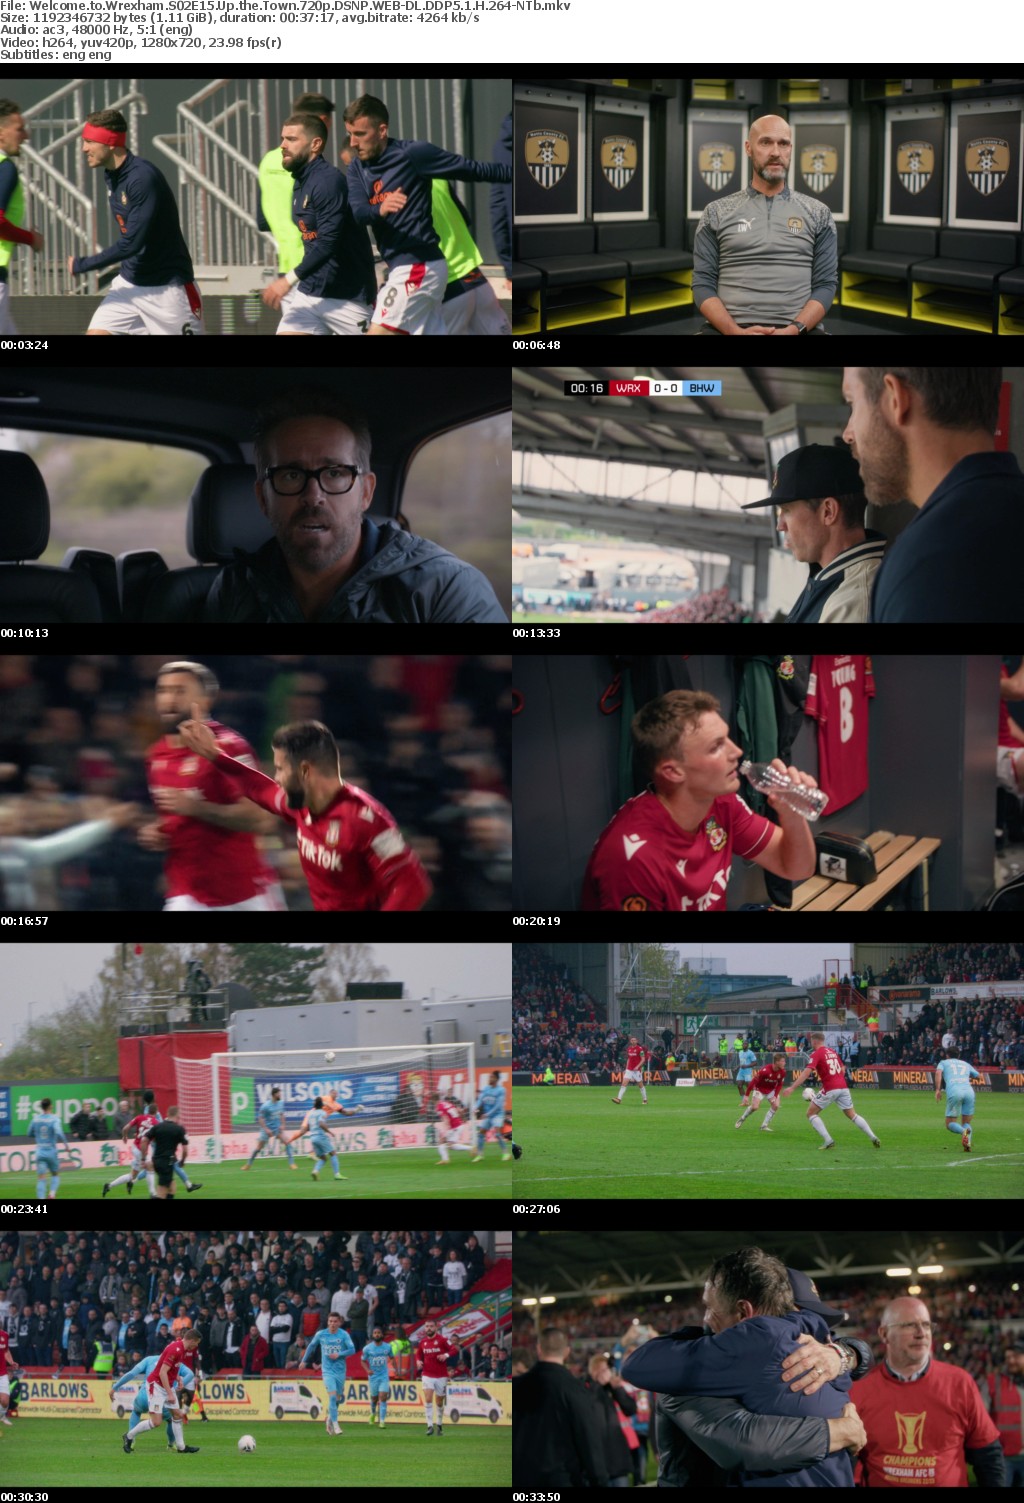 Welcome to Wrexham S02E15 Up the Town 720p DSNP WEB-DL DDP5 1 H 264-NTb